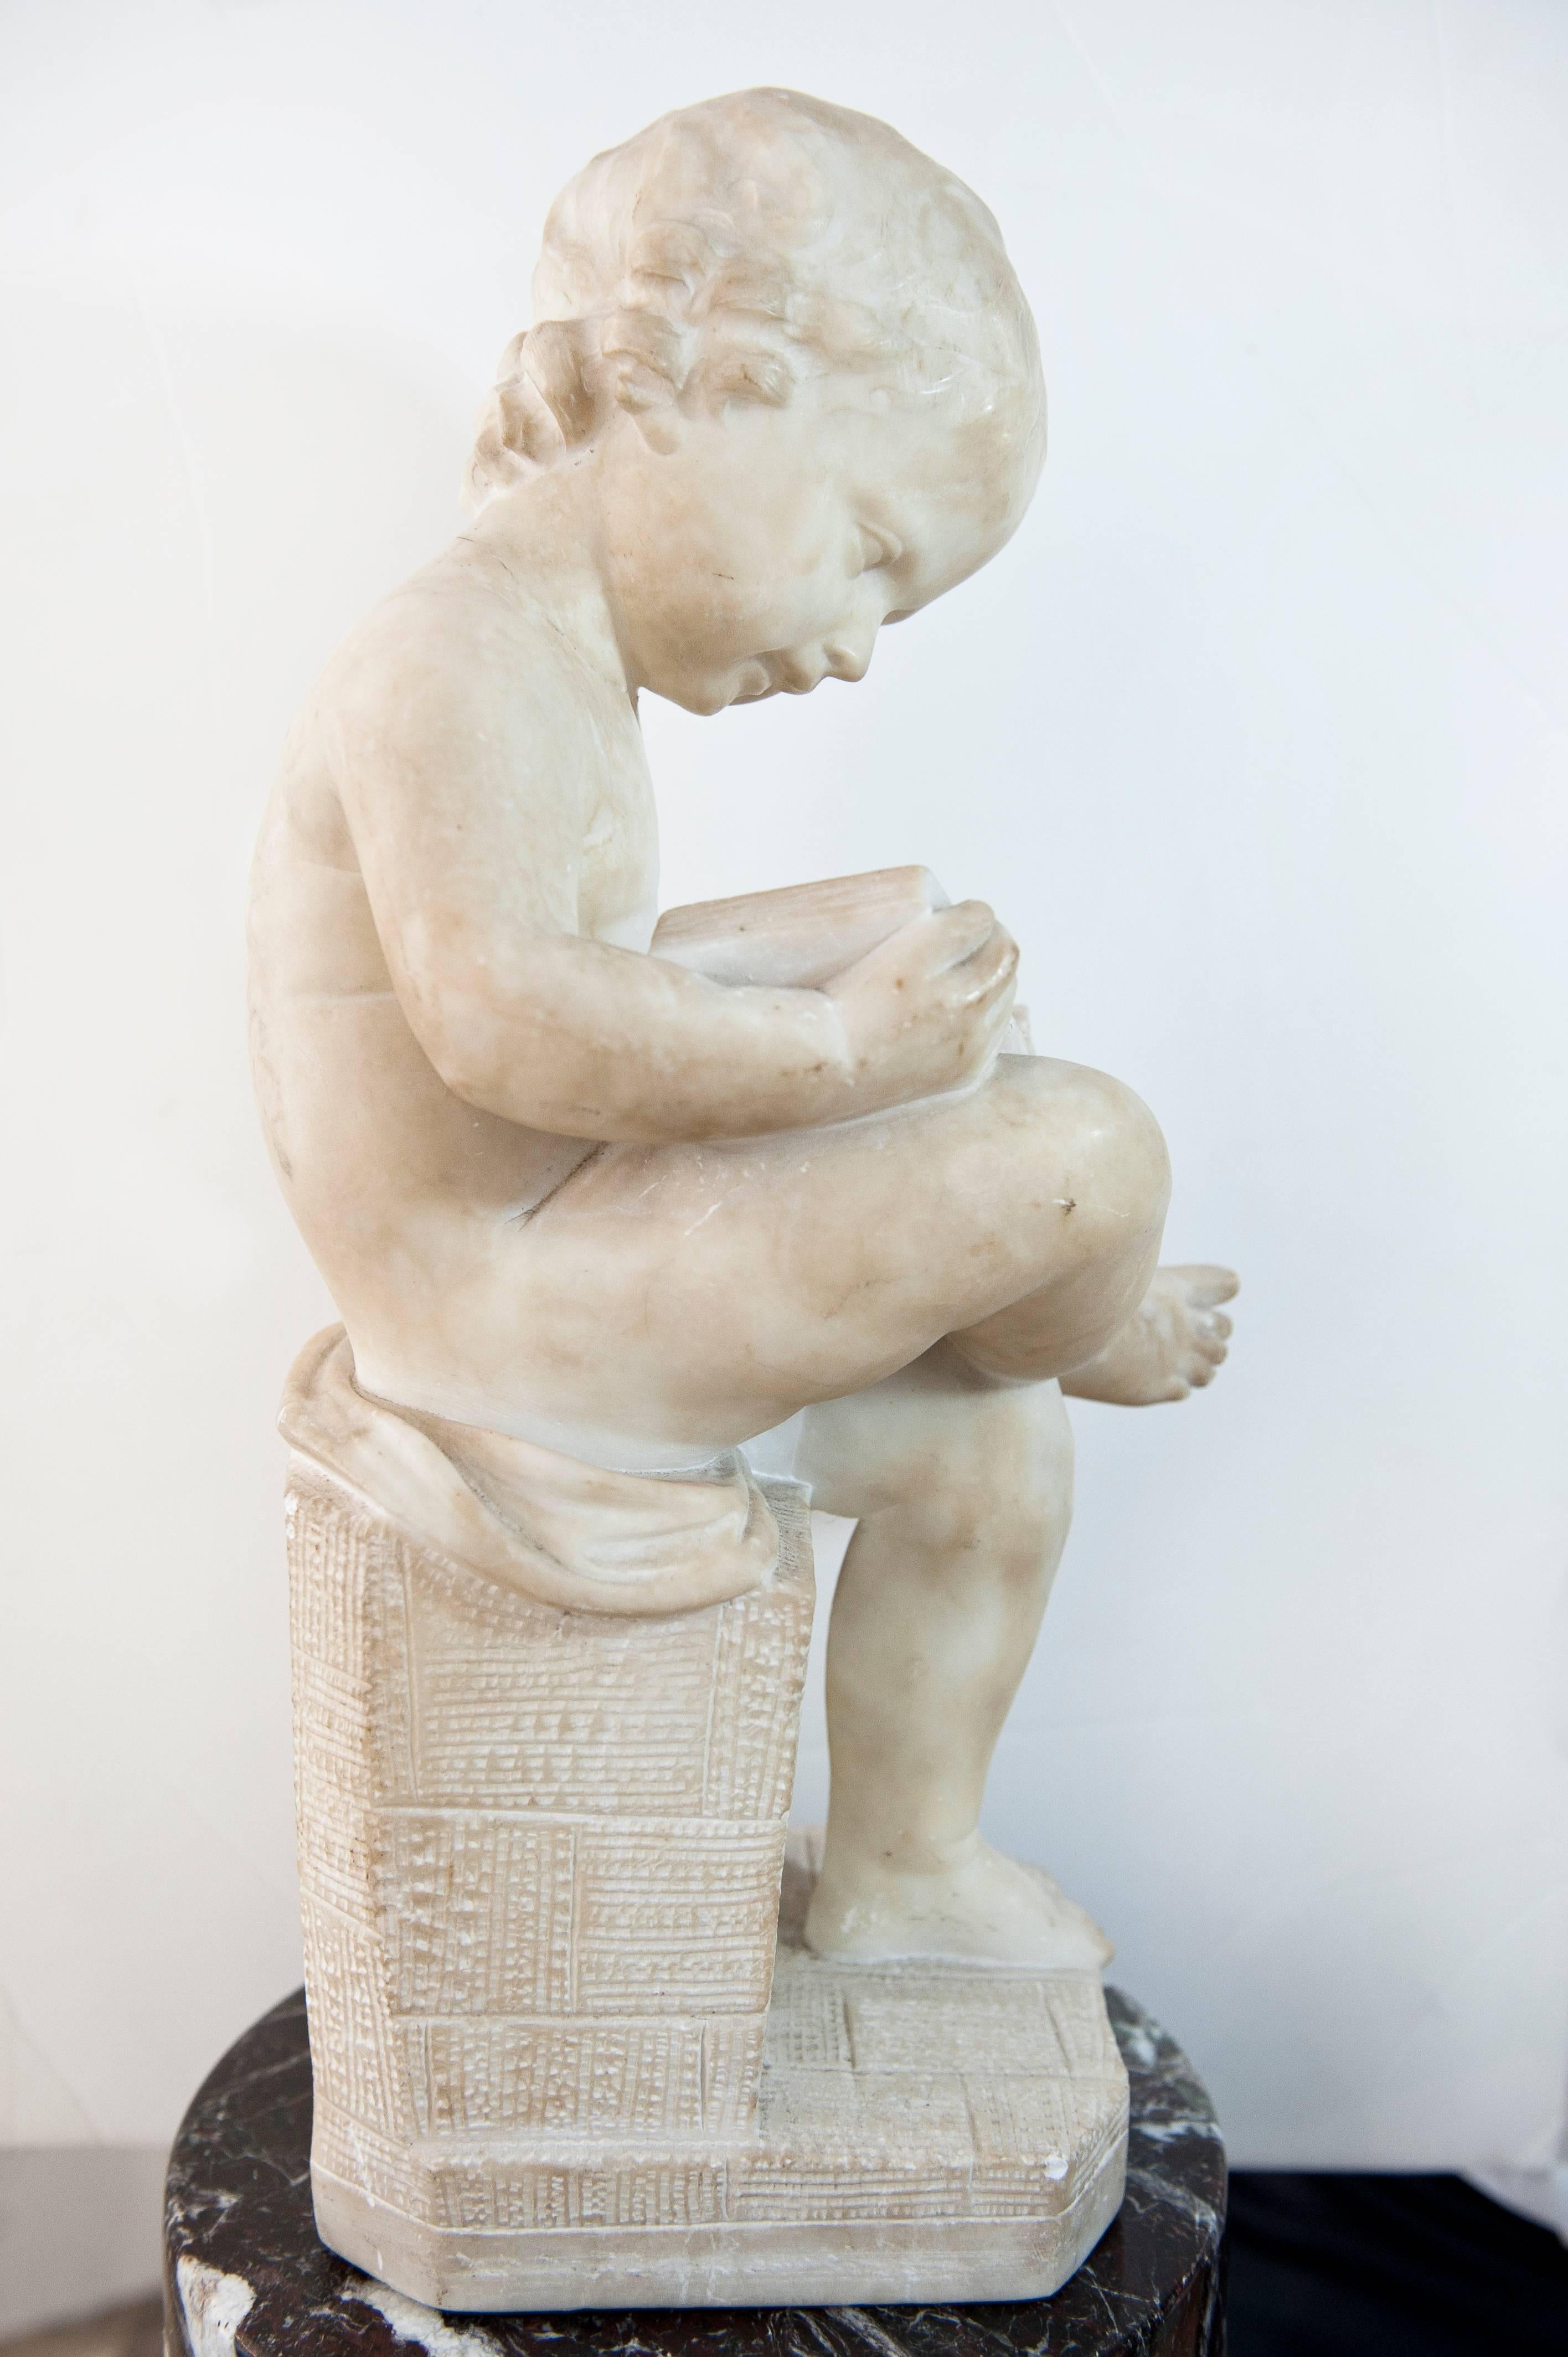 Statuary Marble Antique Italian 19th Century Marble Sculpture Putto Reading a Book Signed Pugi